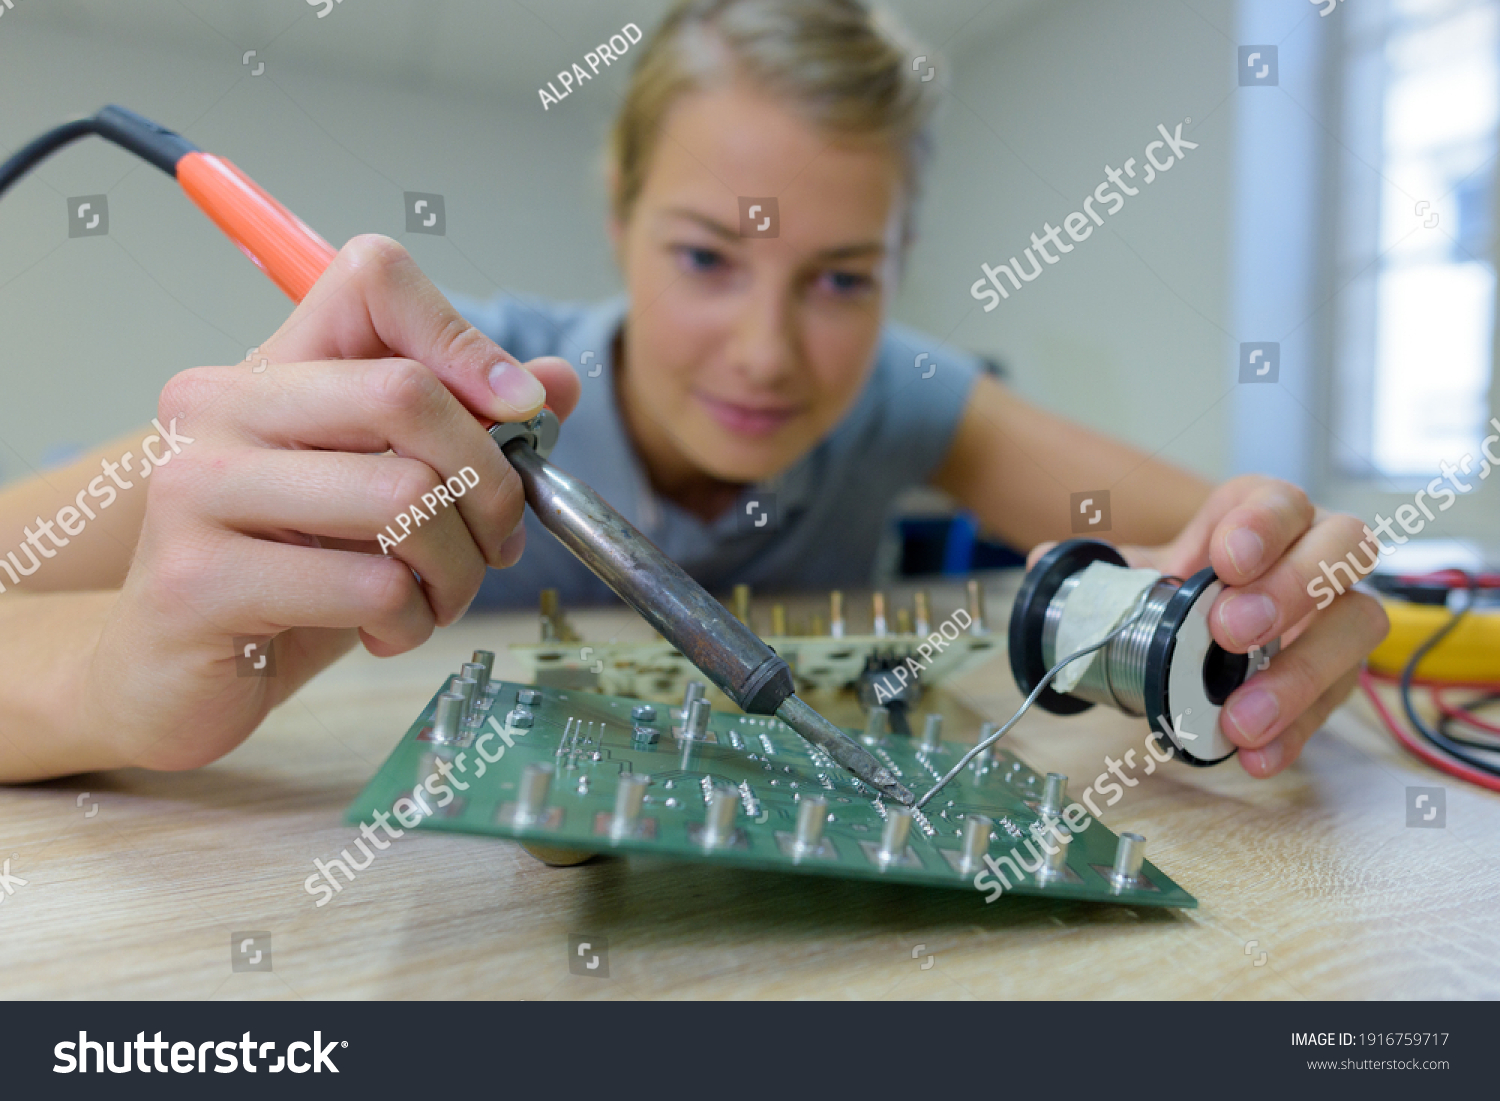 Stock Photo Woman Assembling Works Soldering Iron 1916759717 